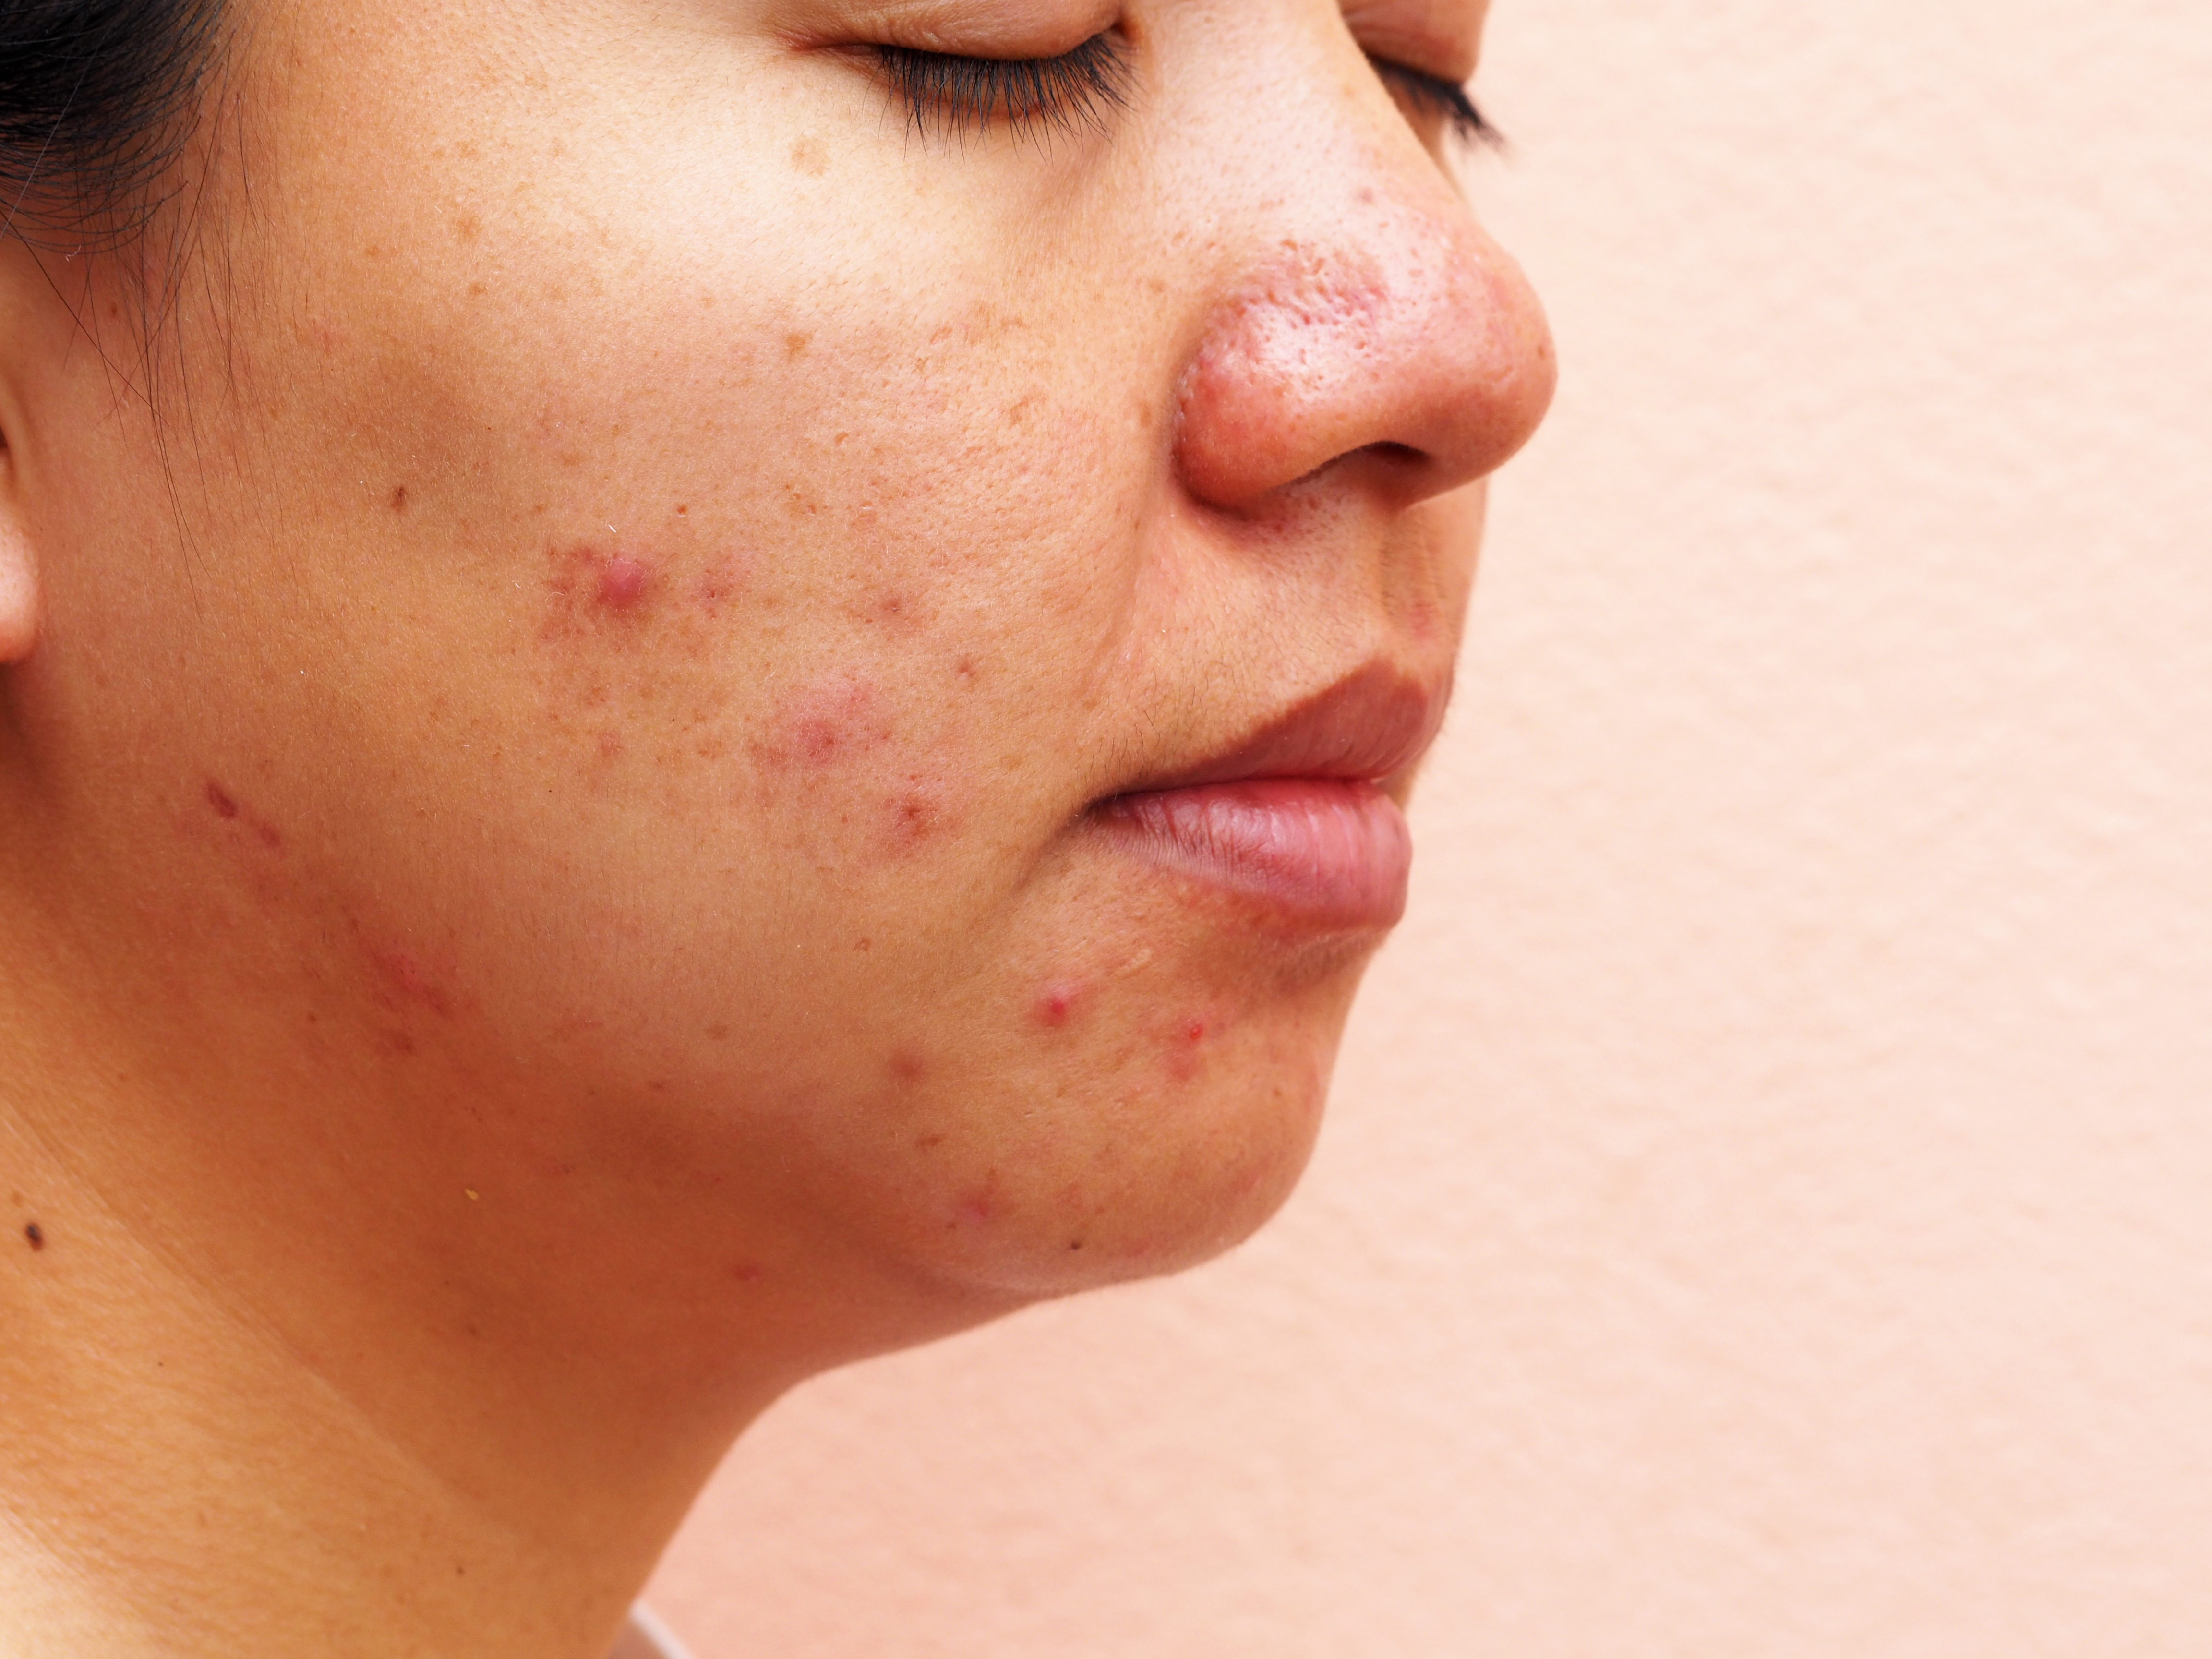 woman with acne healthy skin